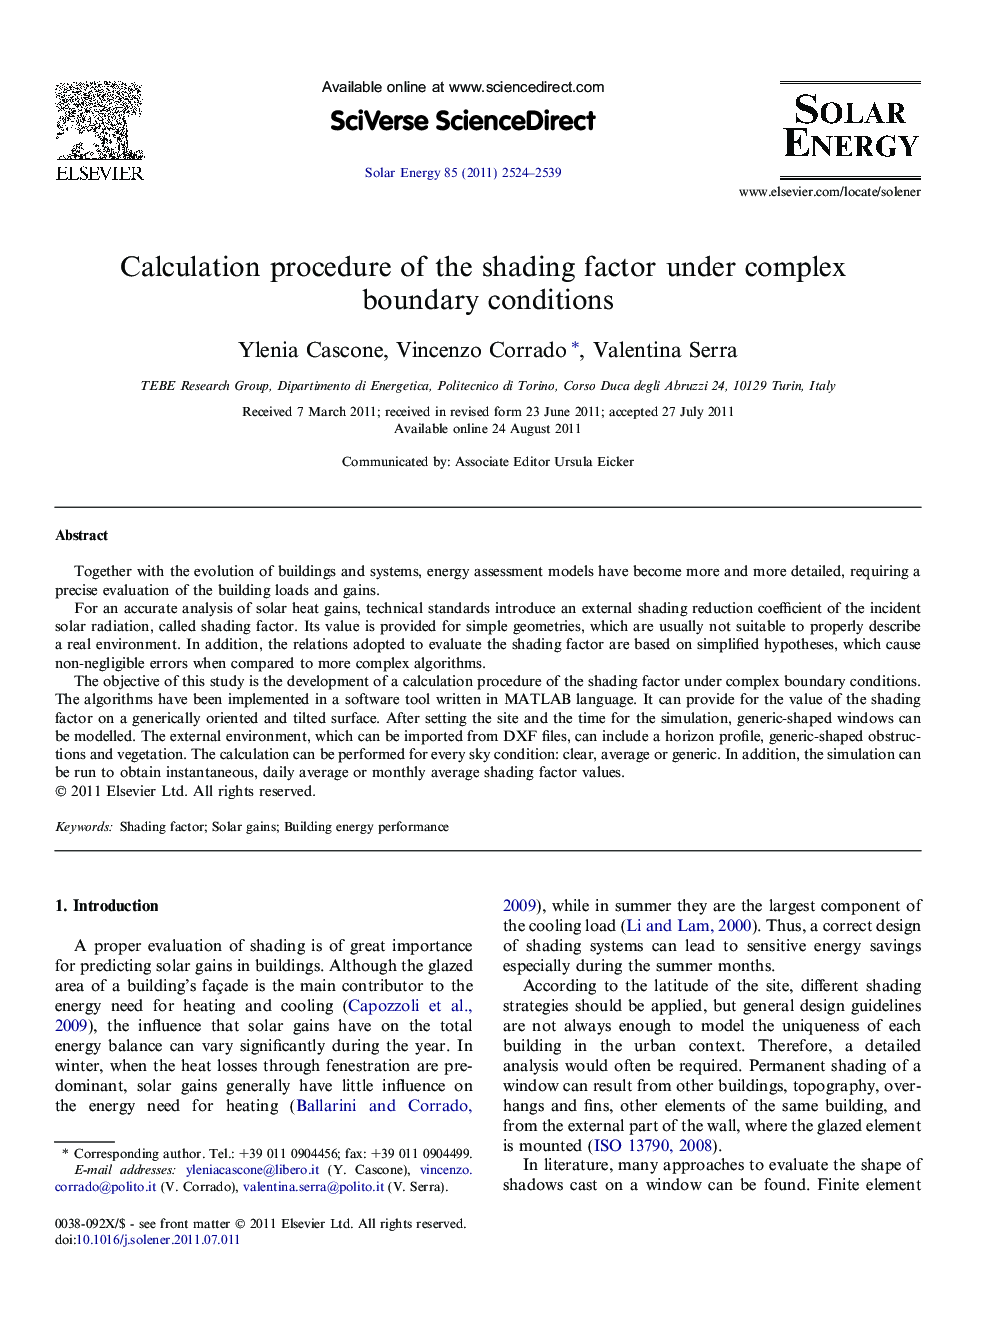 Calculation procedure of the shading factor under complex boundary conditions